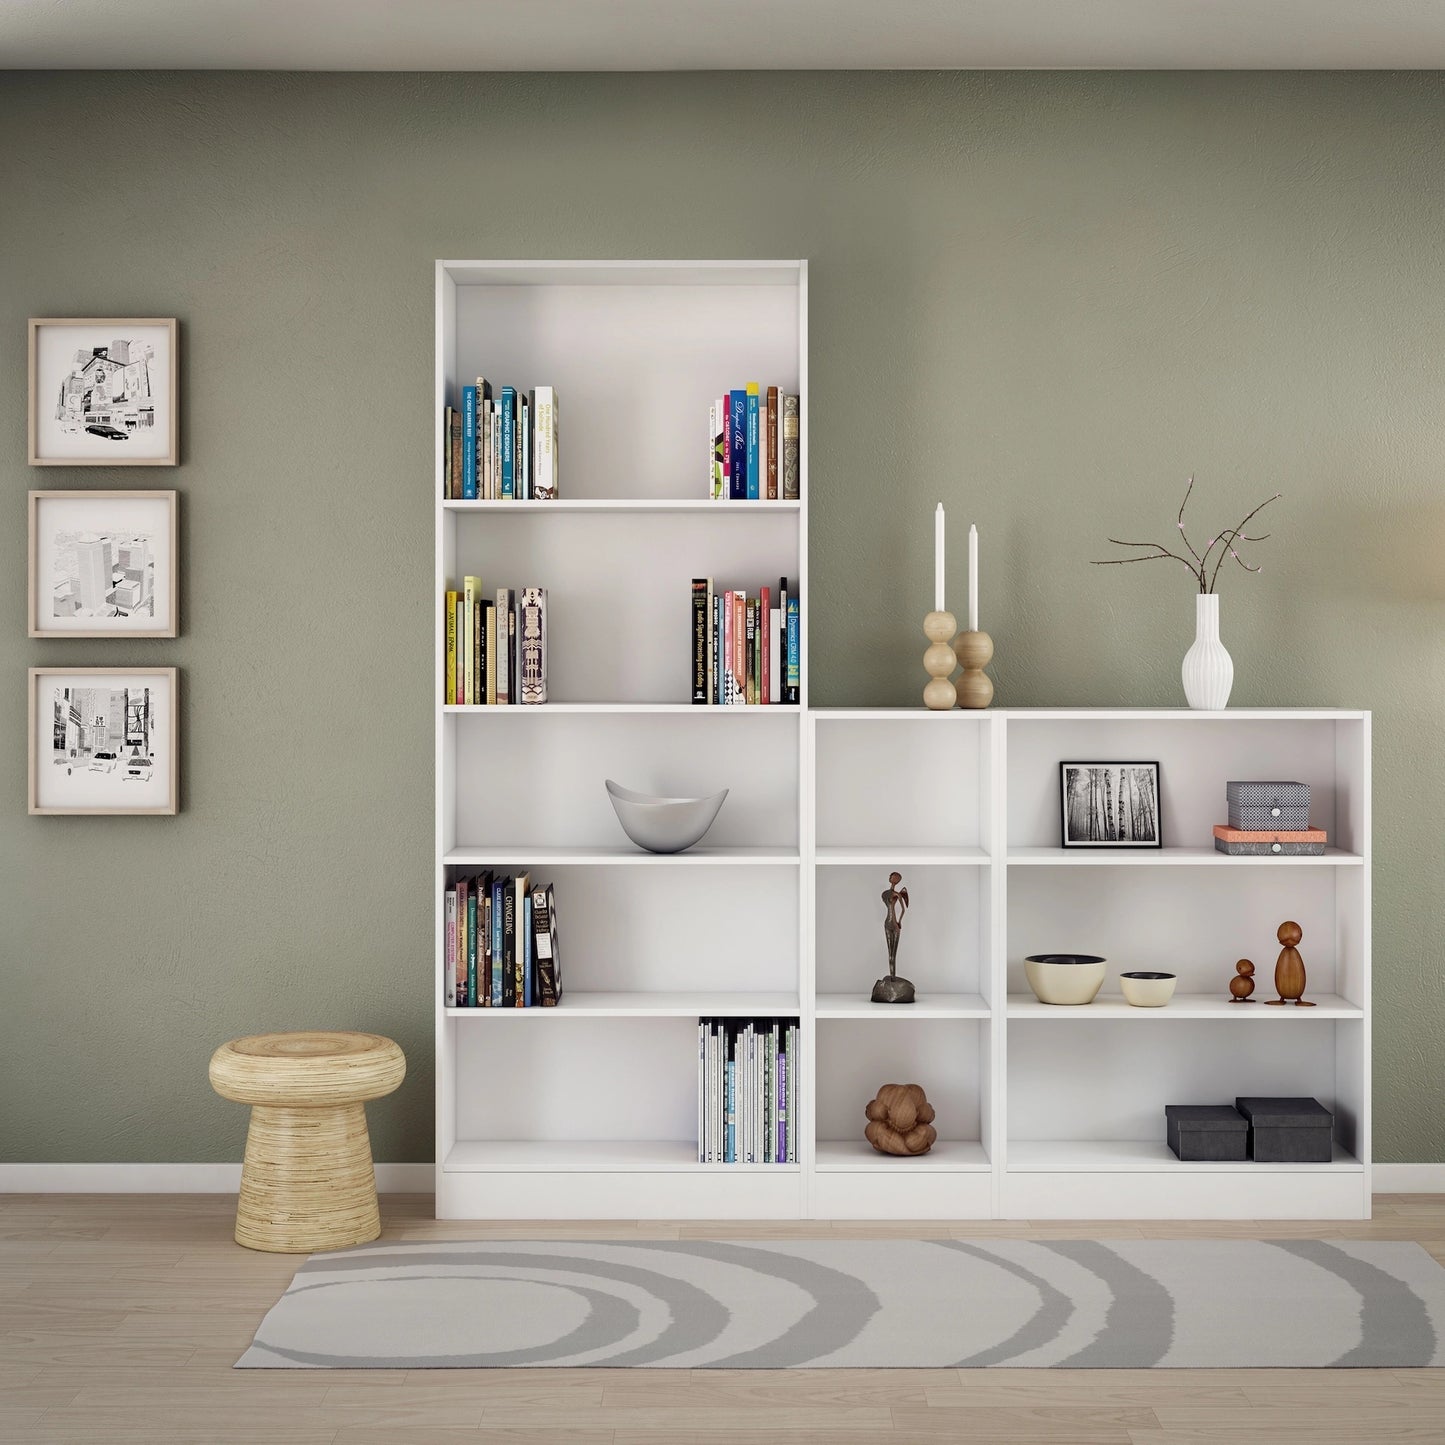 Furniture To Go Basic Low Wide Bookcase (2 Shelves) in White